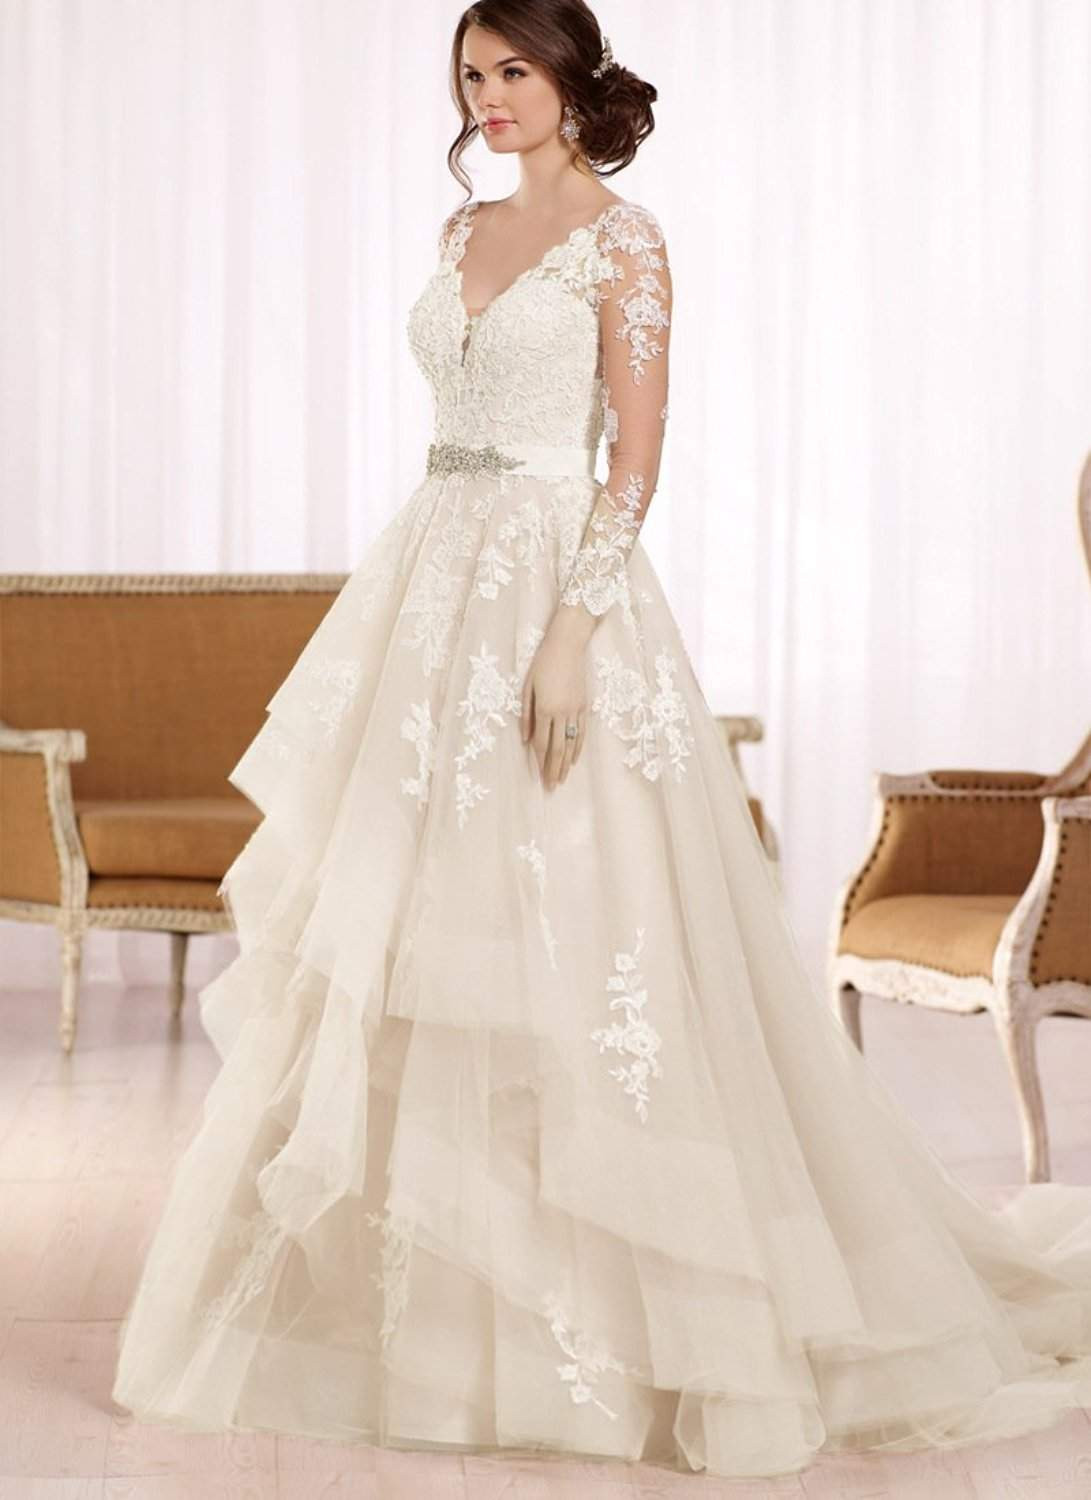 Discounted Wedding Gowns
 Top 50 Best Cheap Wedding Dresses pare Buy & Save